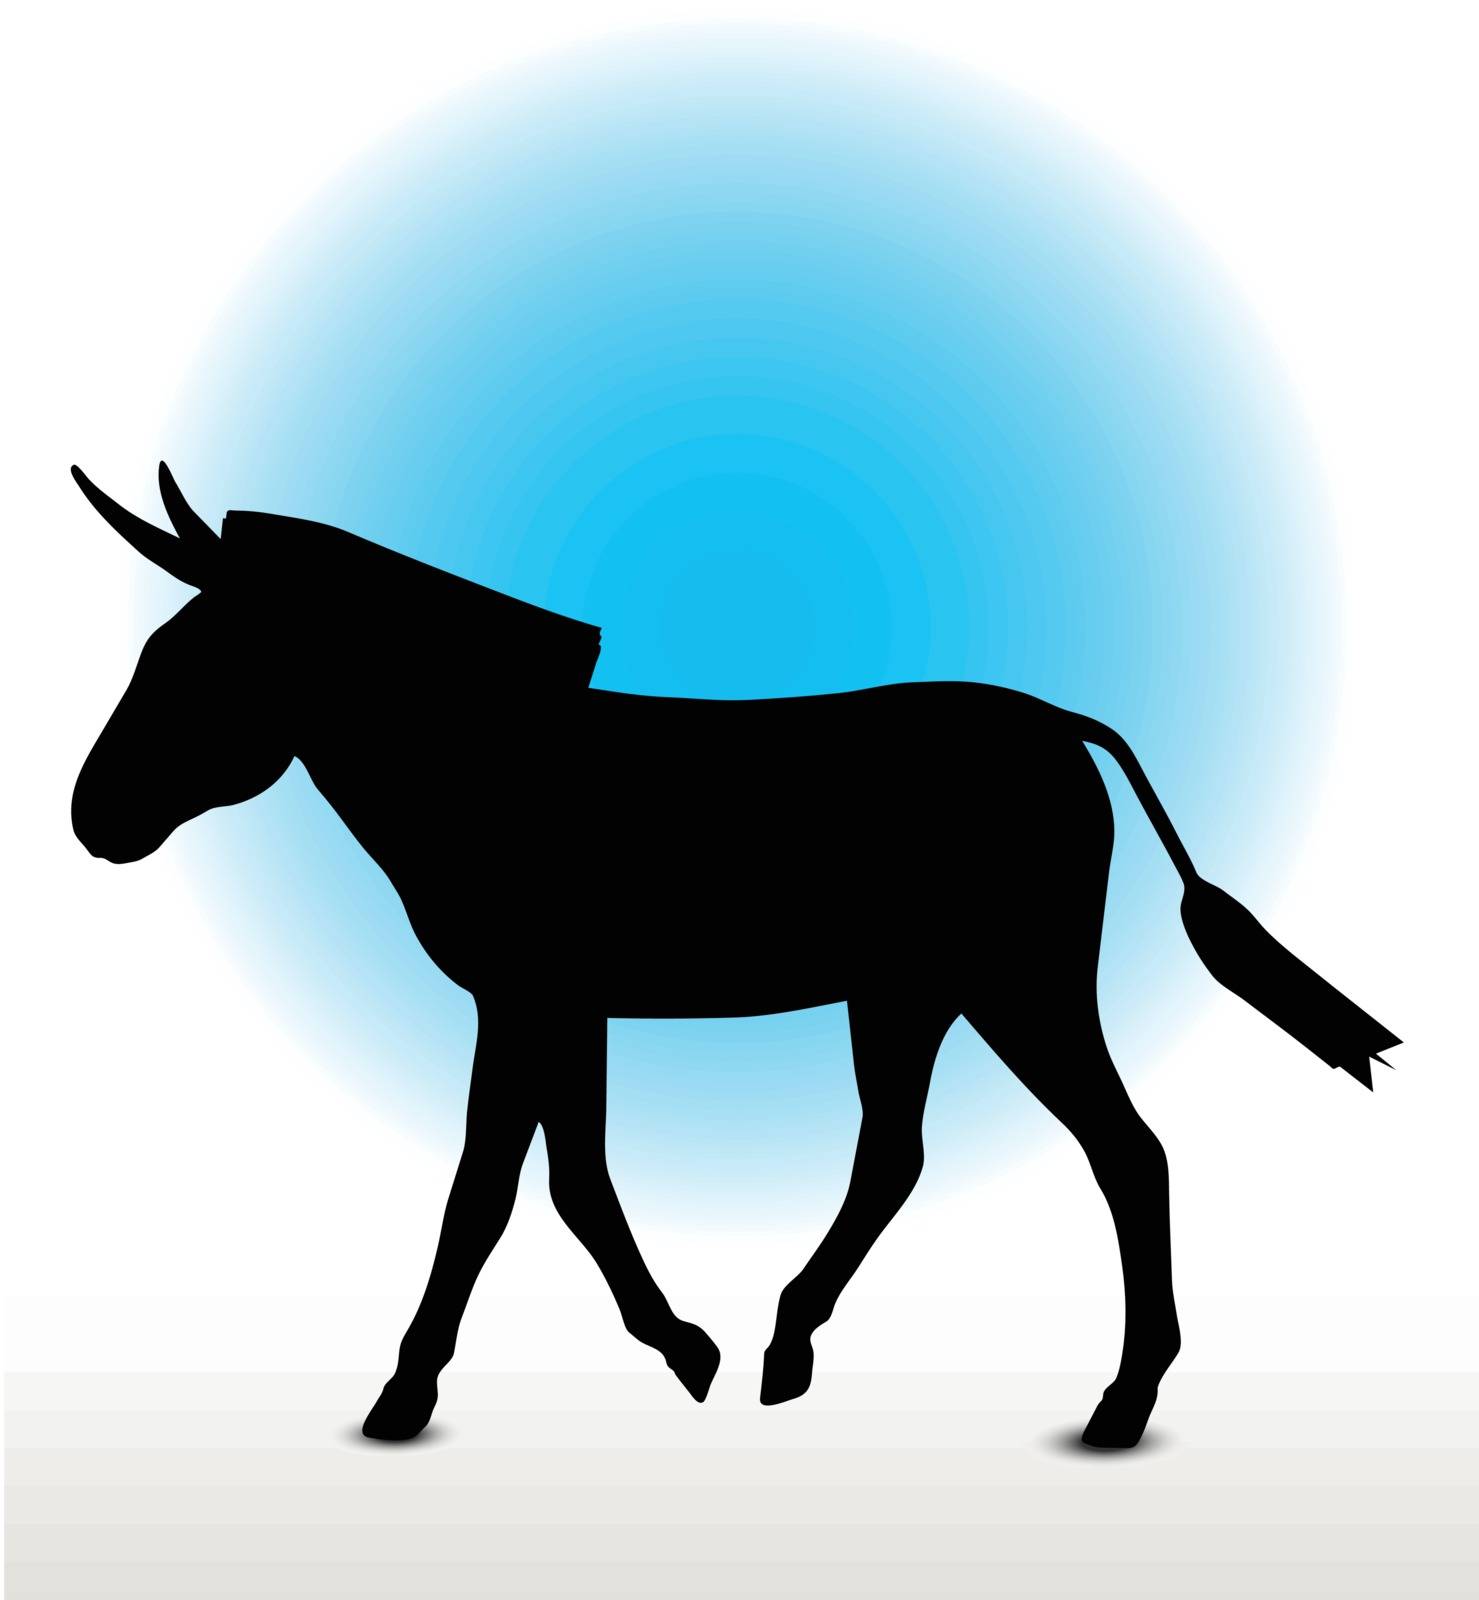 Vector Image, donkey silhouette, in walk pose, isolated on white background
